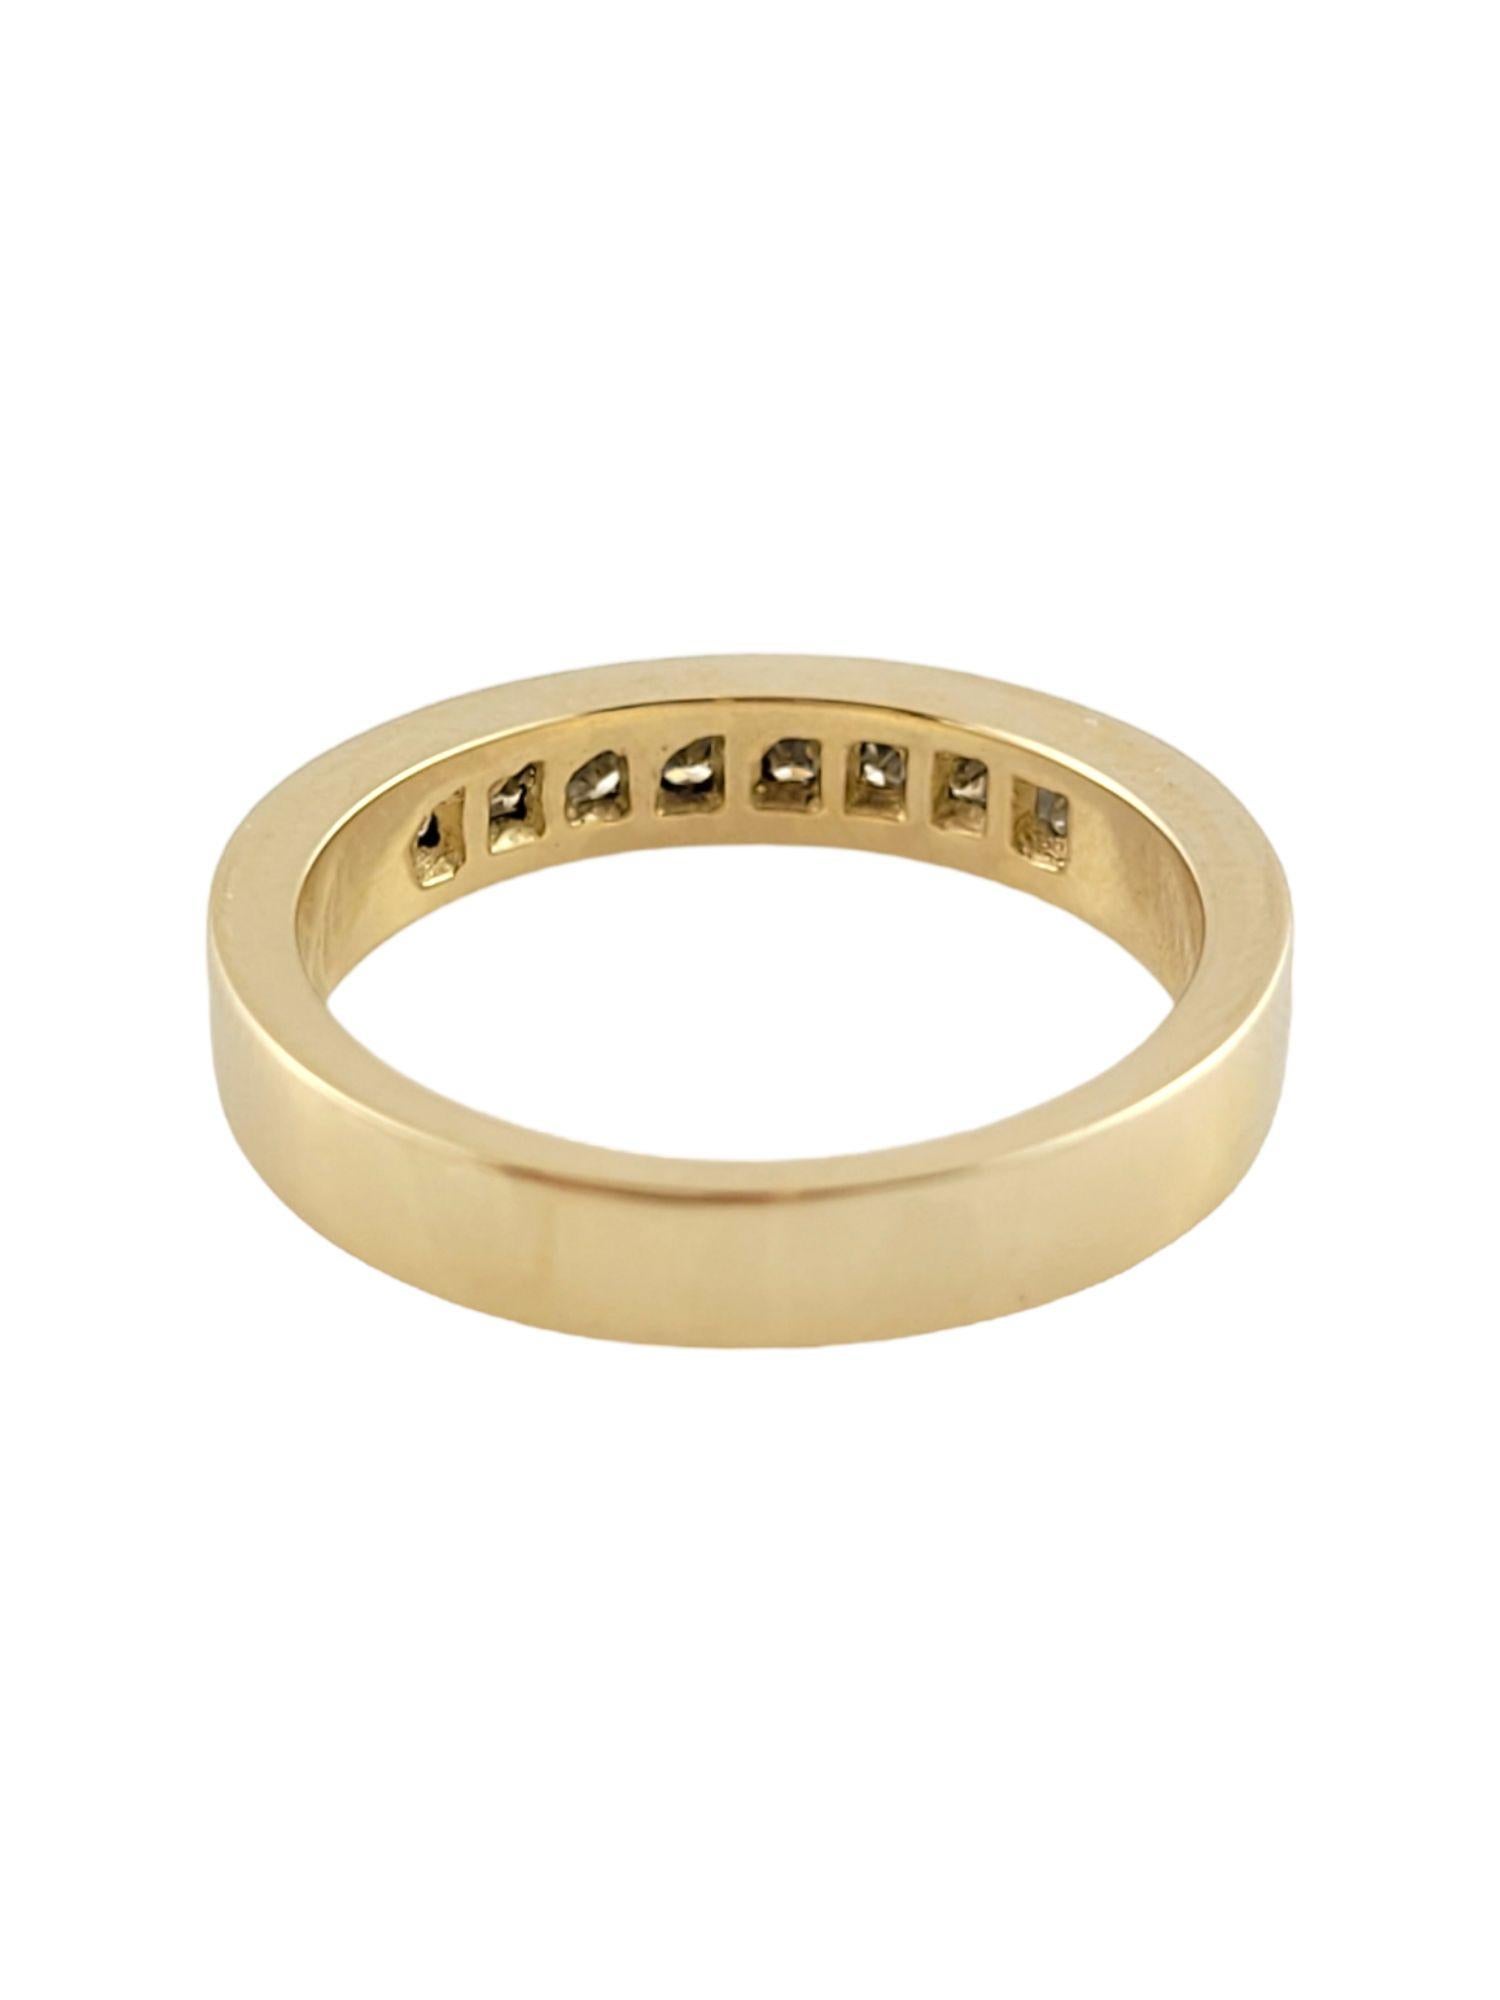 Vintage 14K Yellow Gold Diamond Band Size 6

8 sparkling, princess cut diamonds embedded in a 14K yellow gold band!

Diamond weight: .40 cts

Diamond clarity: SI1-VS2

Diamond color: I-J

Ring size: 6
Shank: 3.5mm

Weight: 3.8 g/ 2.4 dwt

Hallmark: